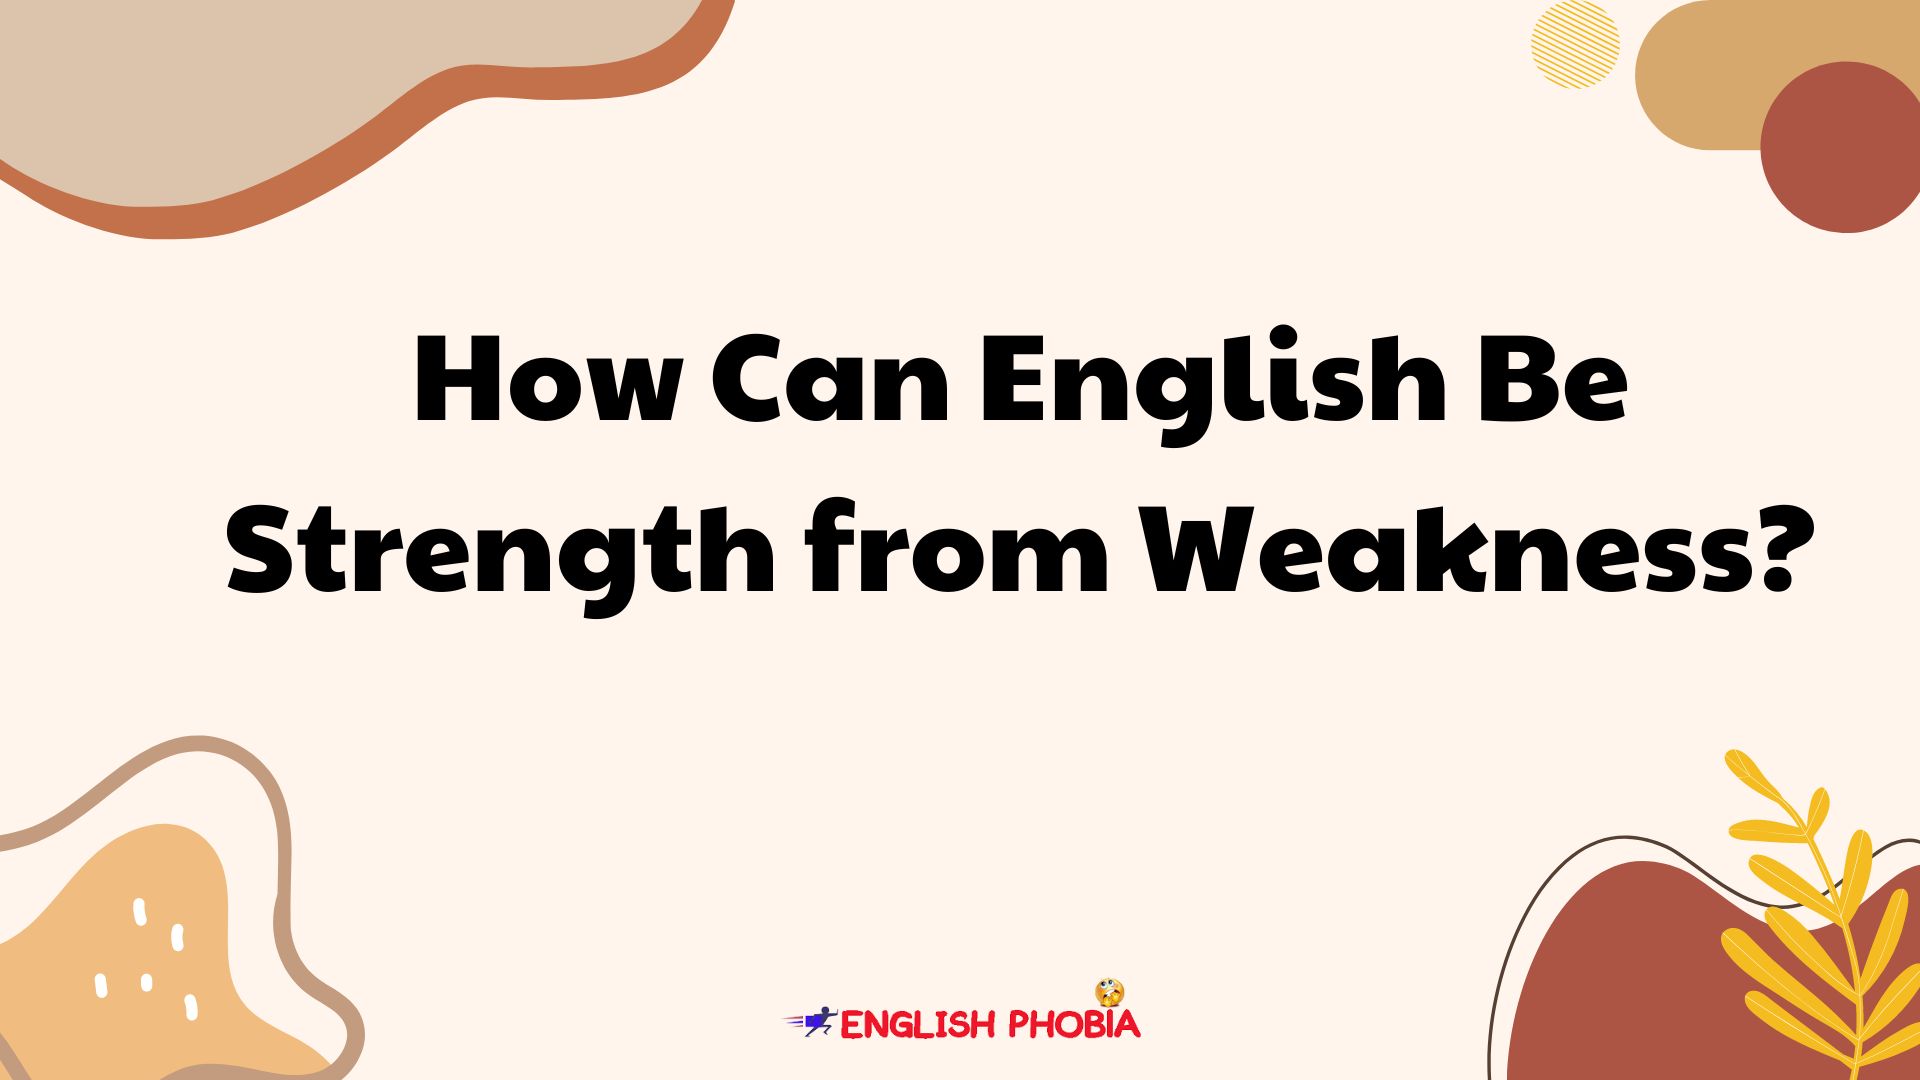 How Can English Be Strength from Weakness?